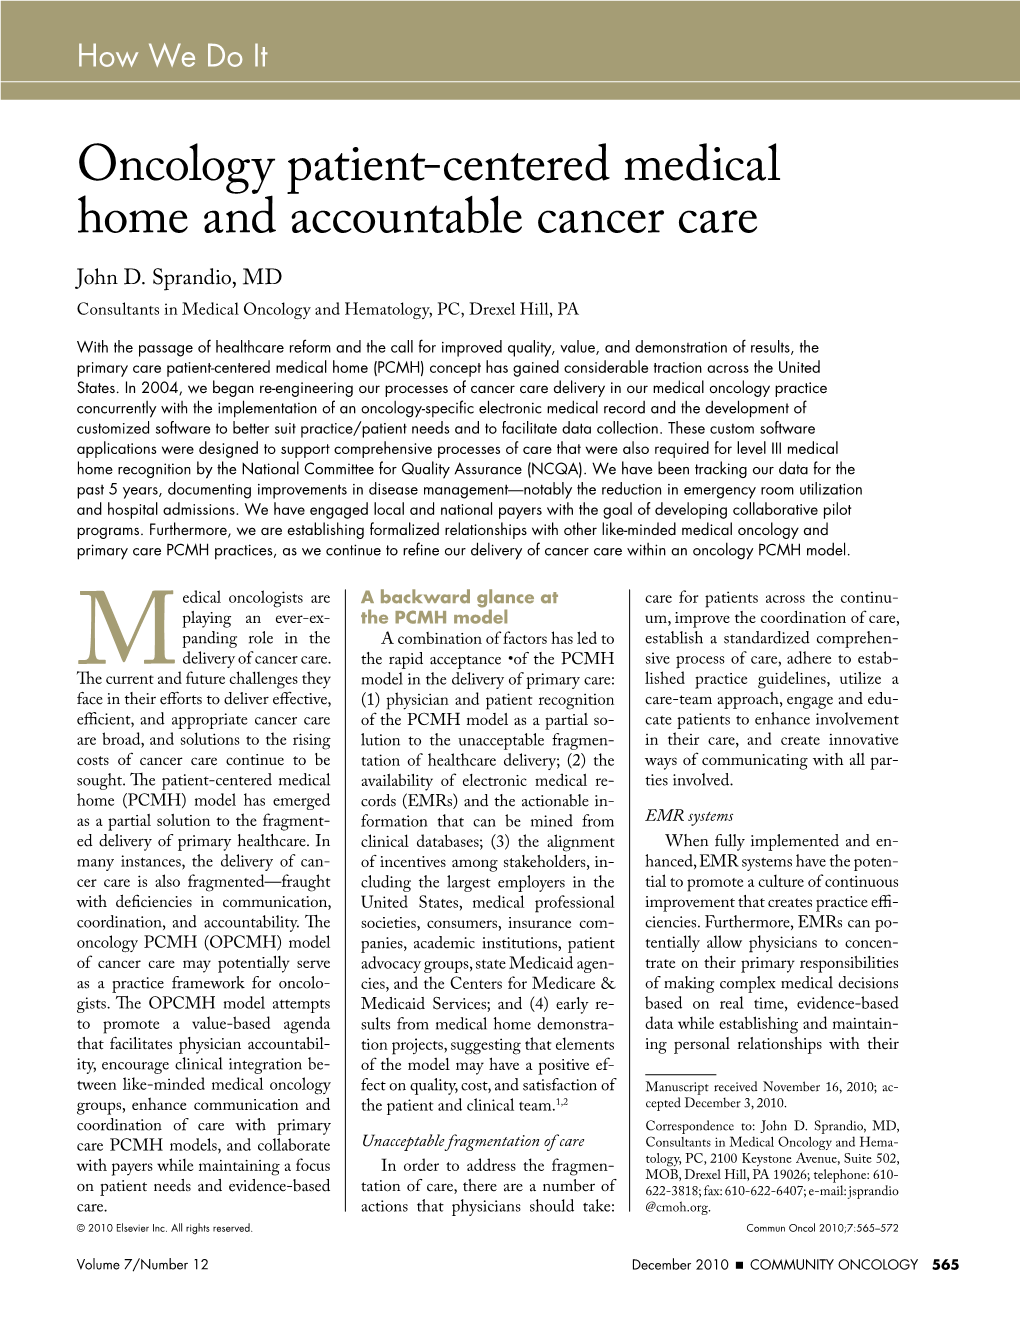 Oncology Patient-Centered Medical Home and Accountable Cancer Care John D